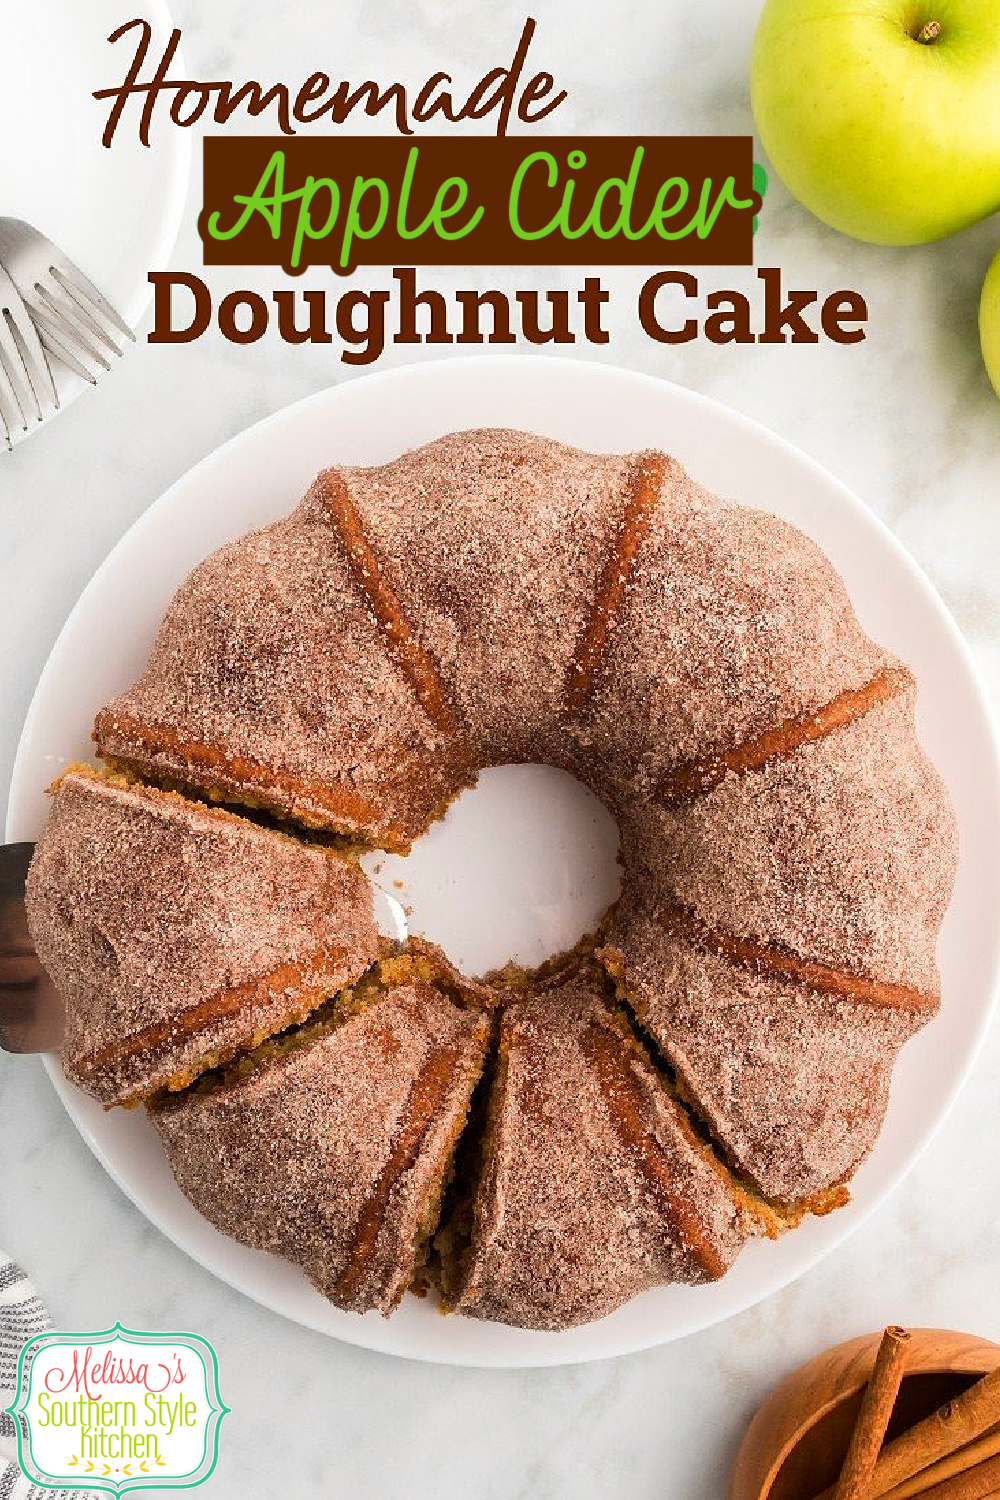 This Apple Cider Doughnut Cake is a delectable fusion of two harvest favorites combining them into one glorious fall treat #applecider #appleciderdoughnut #appleciderdoughnutcake #applecake #applerecipes #fallbaking #appledoughnuts via @melissasssk